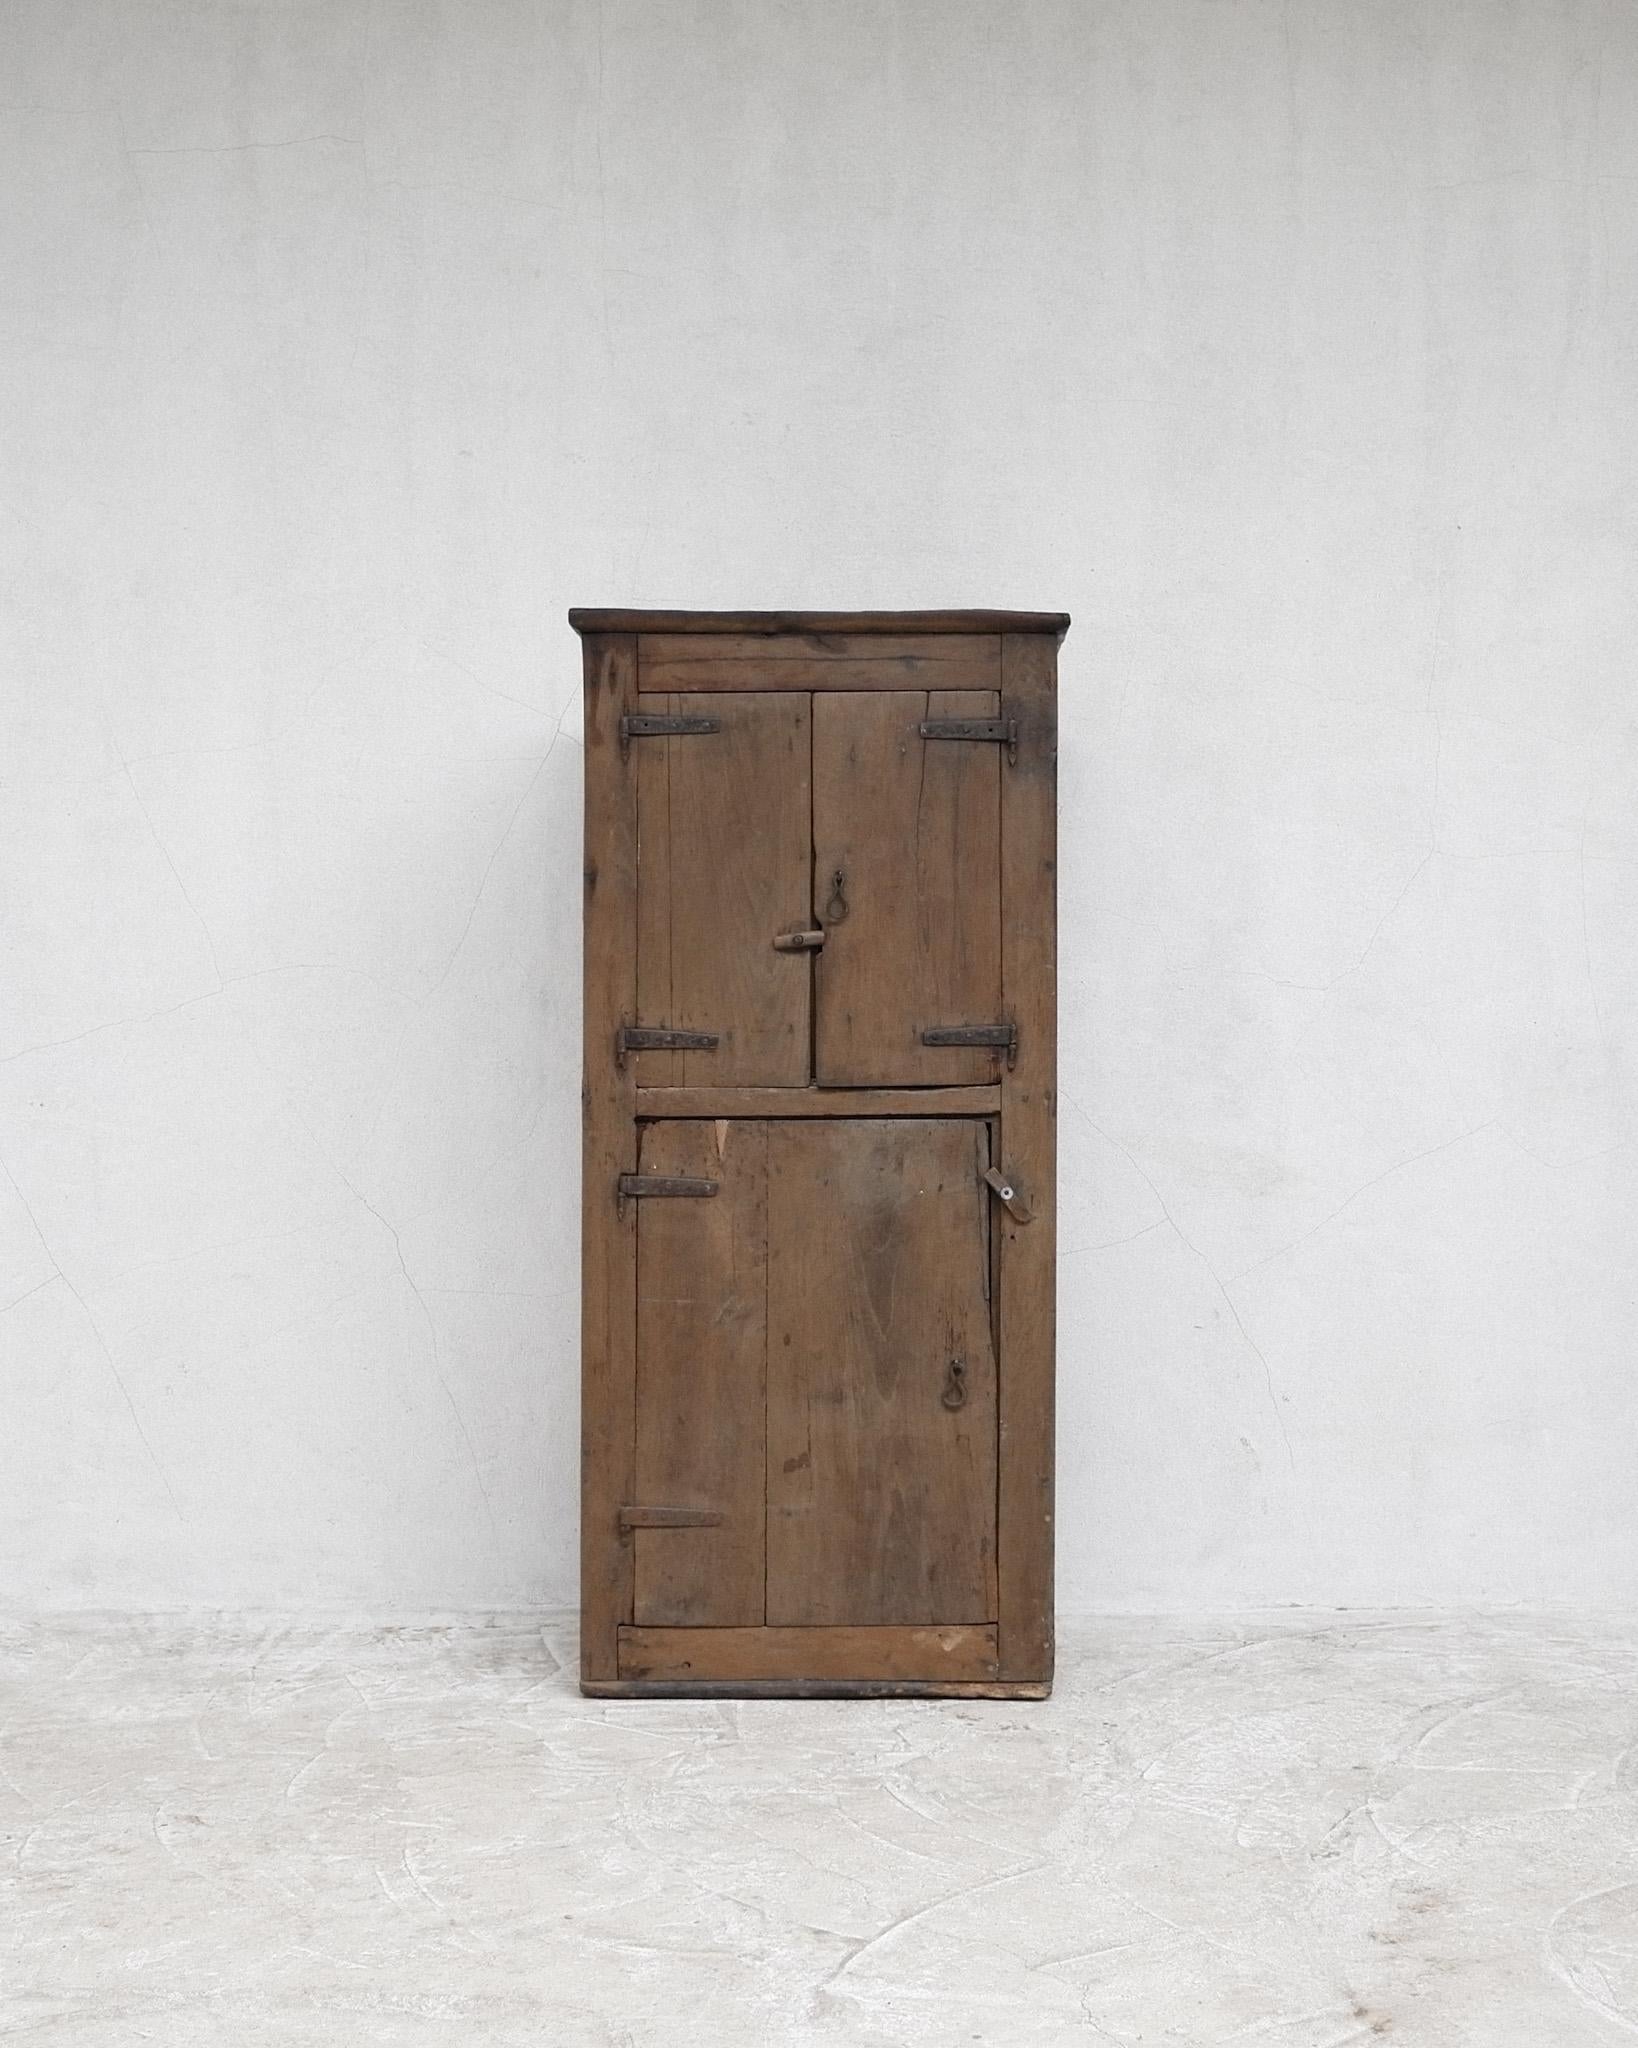 A good sized solid chestnut 18th C. Mountain cupboard.

Either Andorran or Catalan in origin.

Bleached-out & heavily patinated with age old repairs.

-

We offer free shipping to the USA/Canada through Fedex with this item.